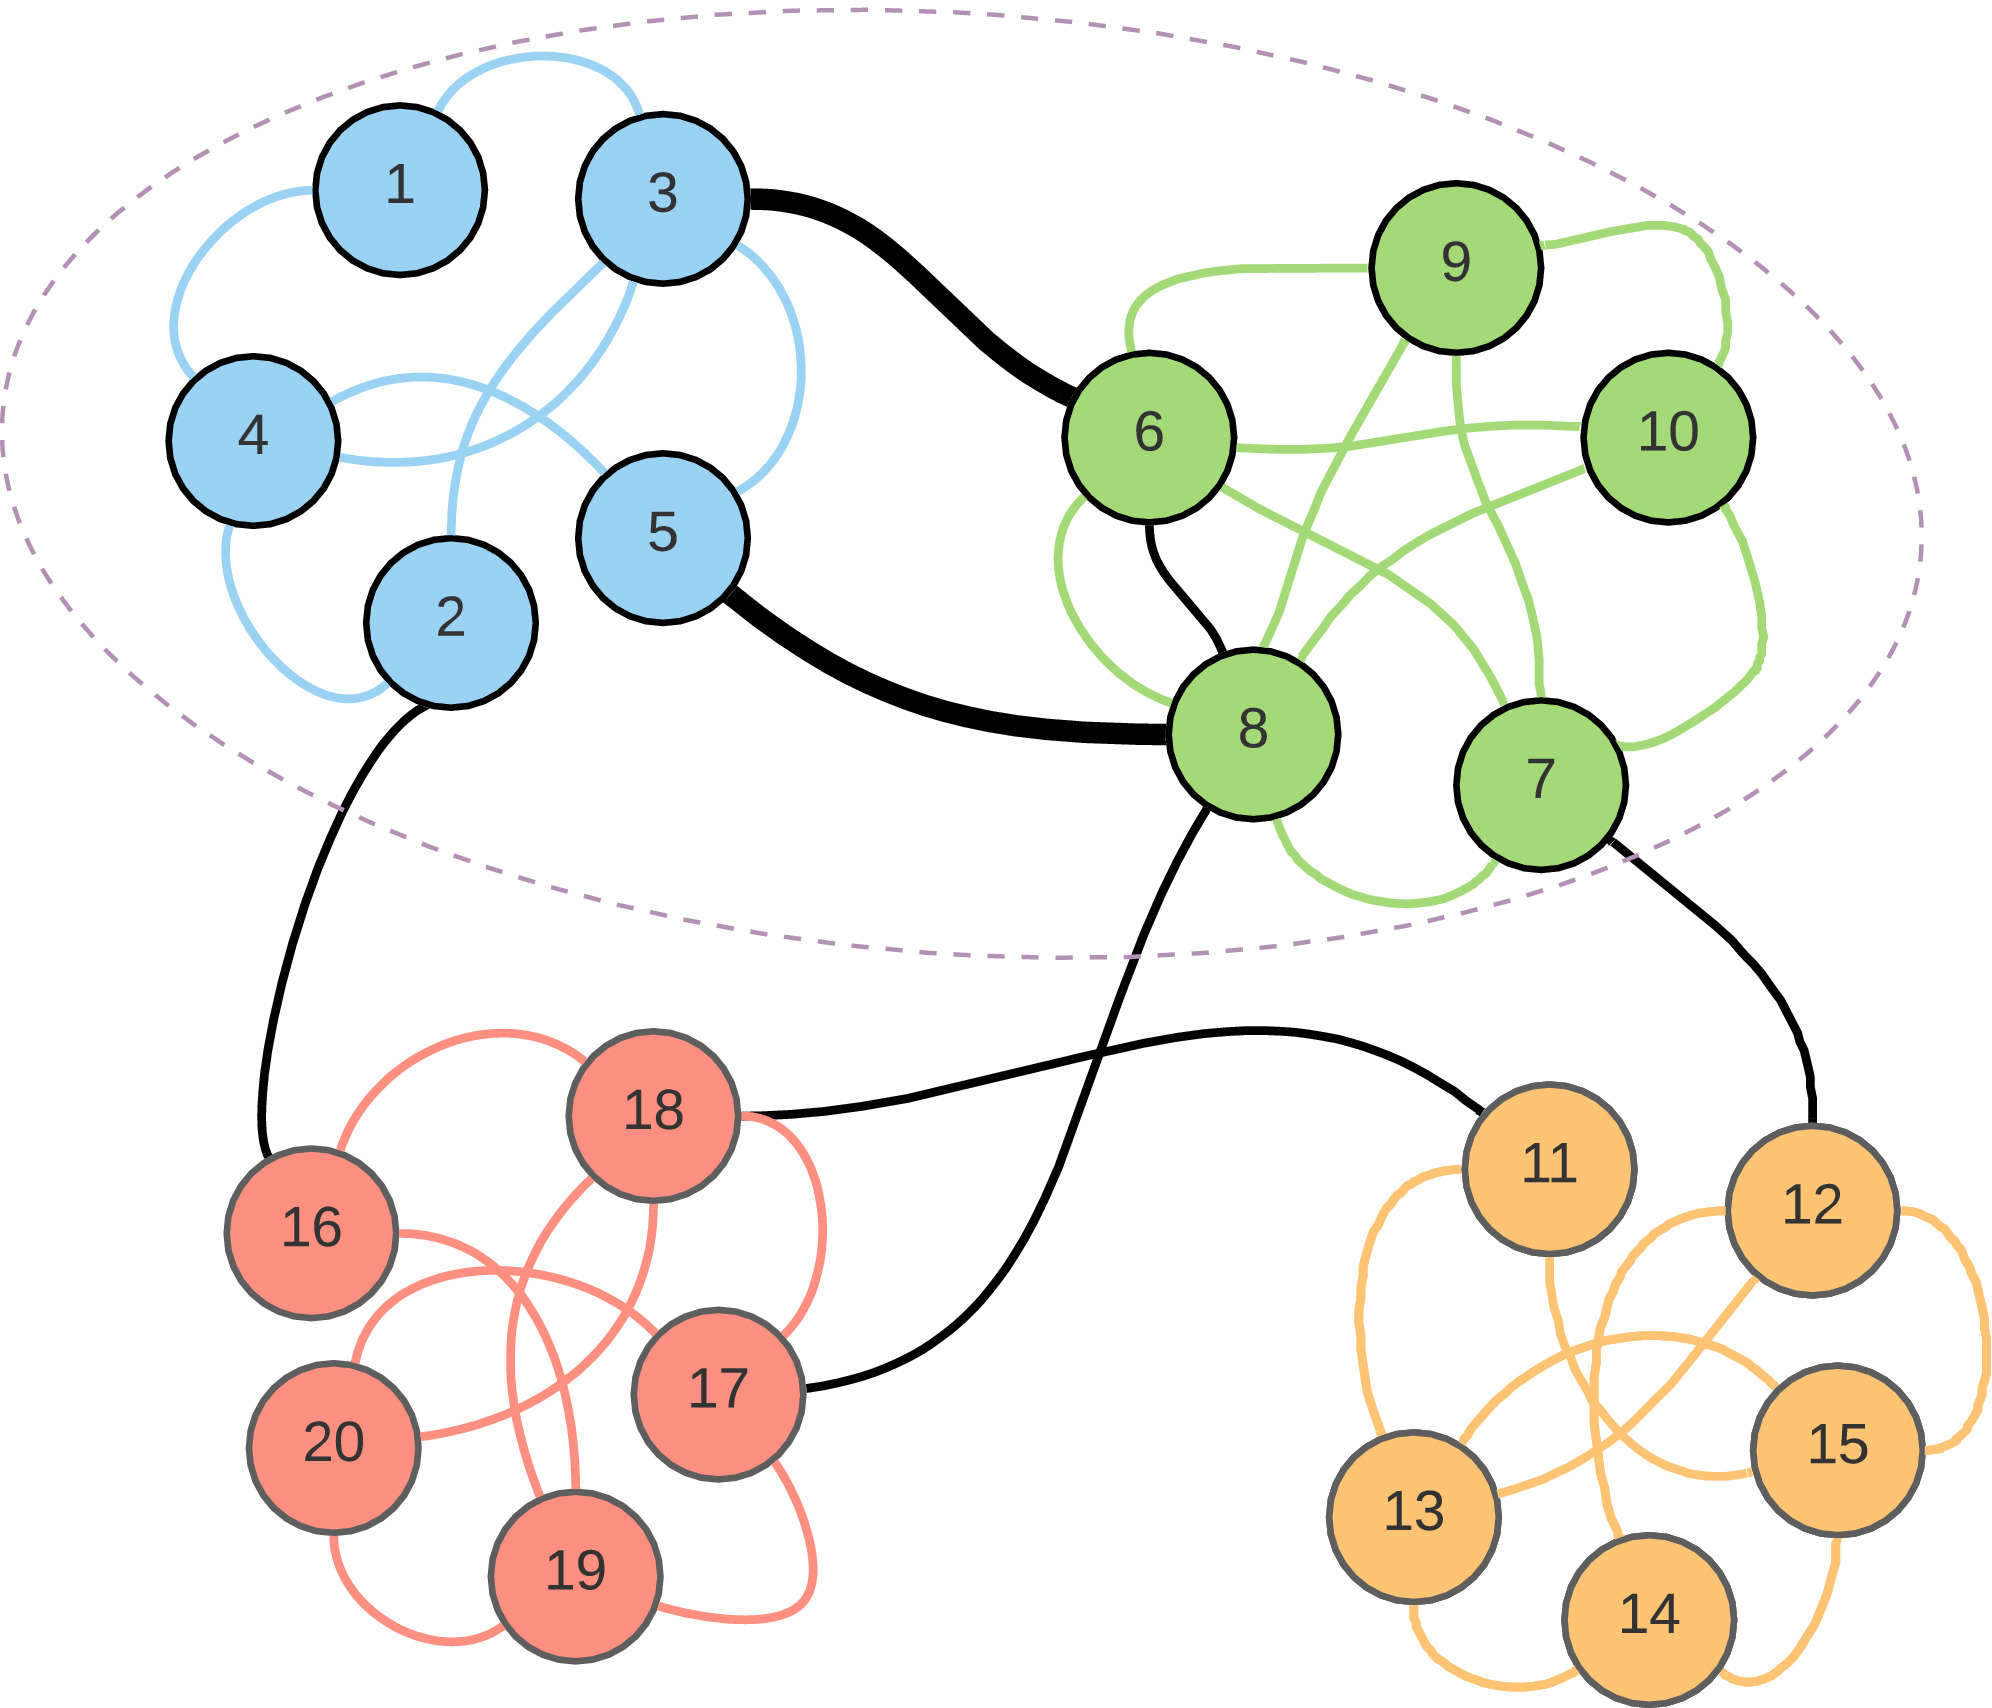 Identifying flow modules in ecological networks using Infomap